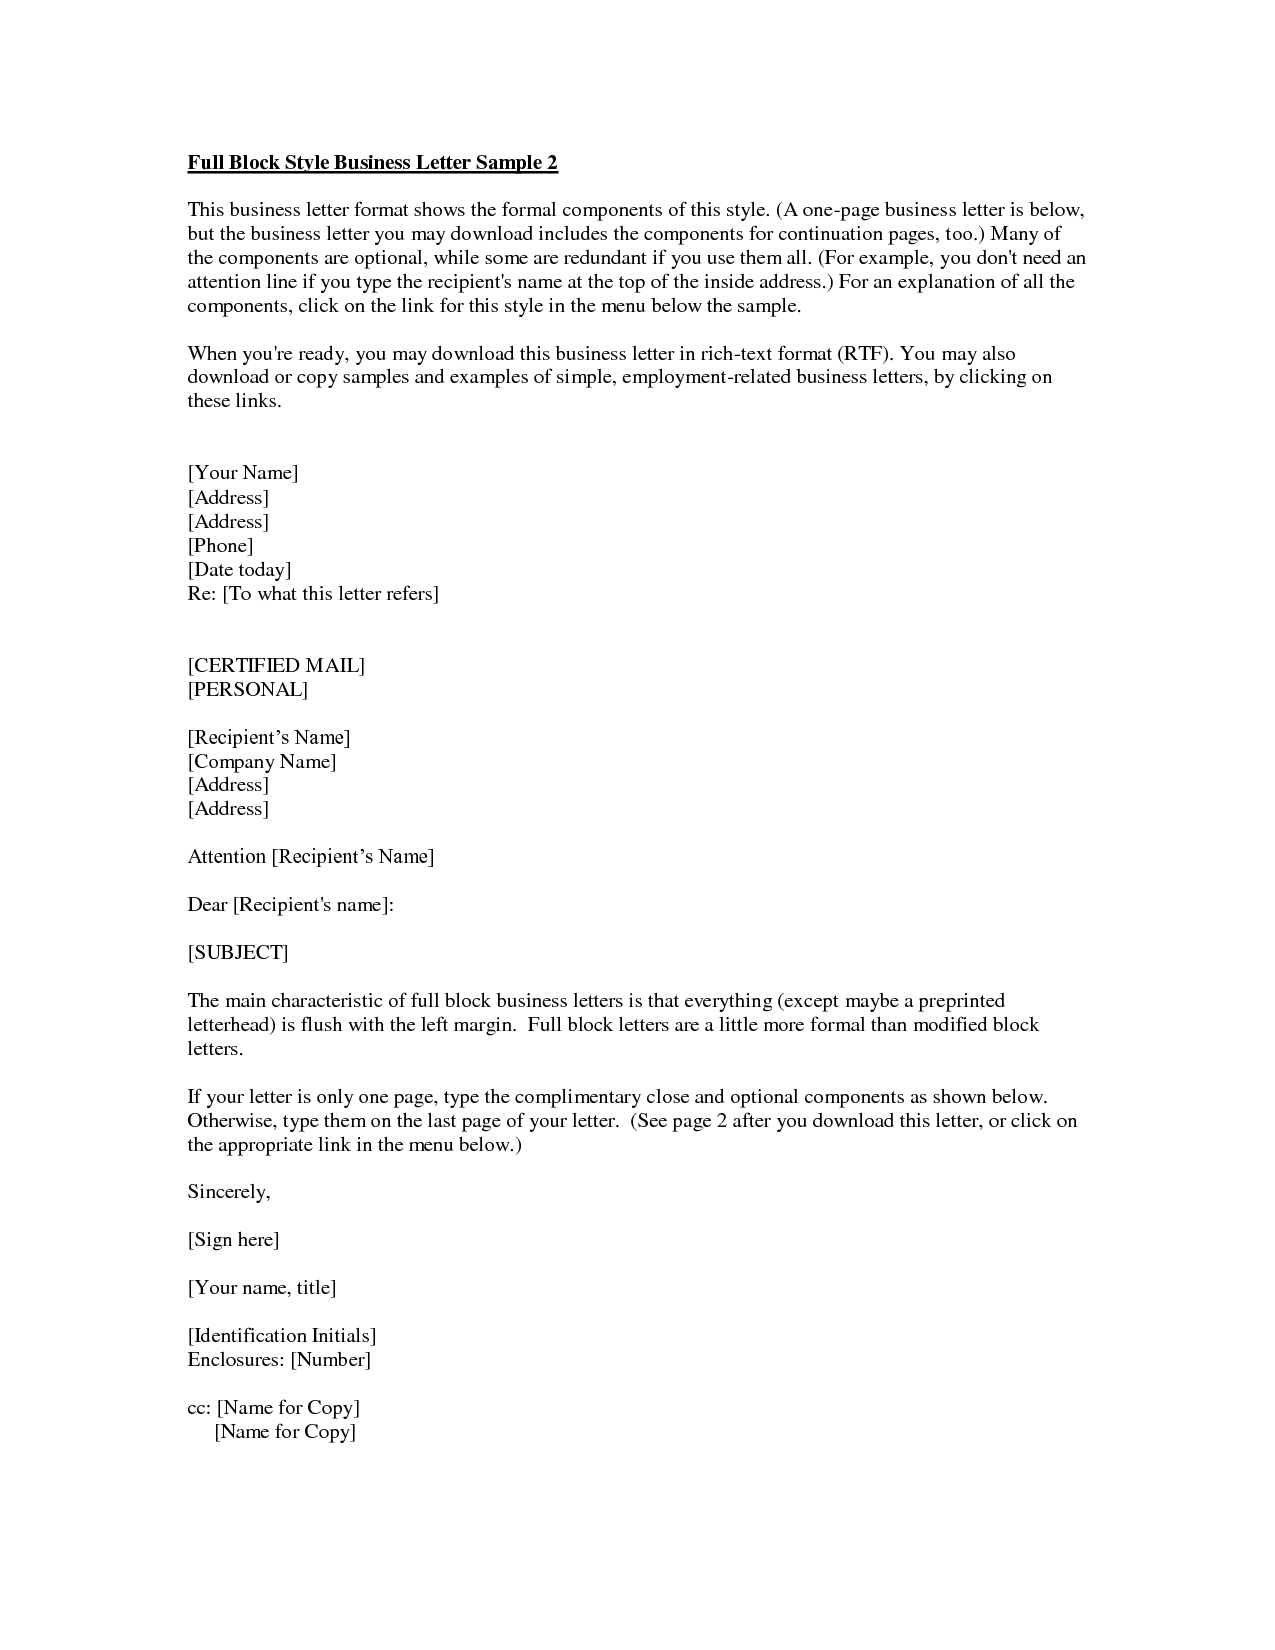 Business Letter Format With Cc And Enclosures Resume Pics And 